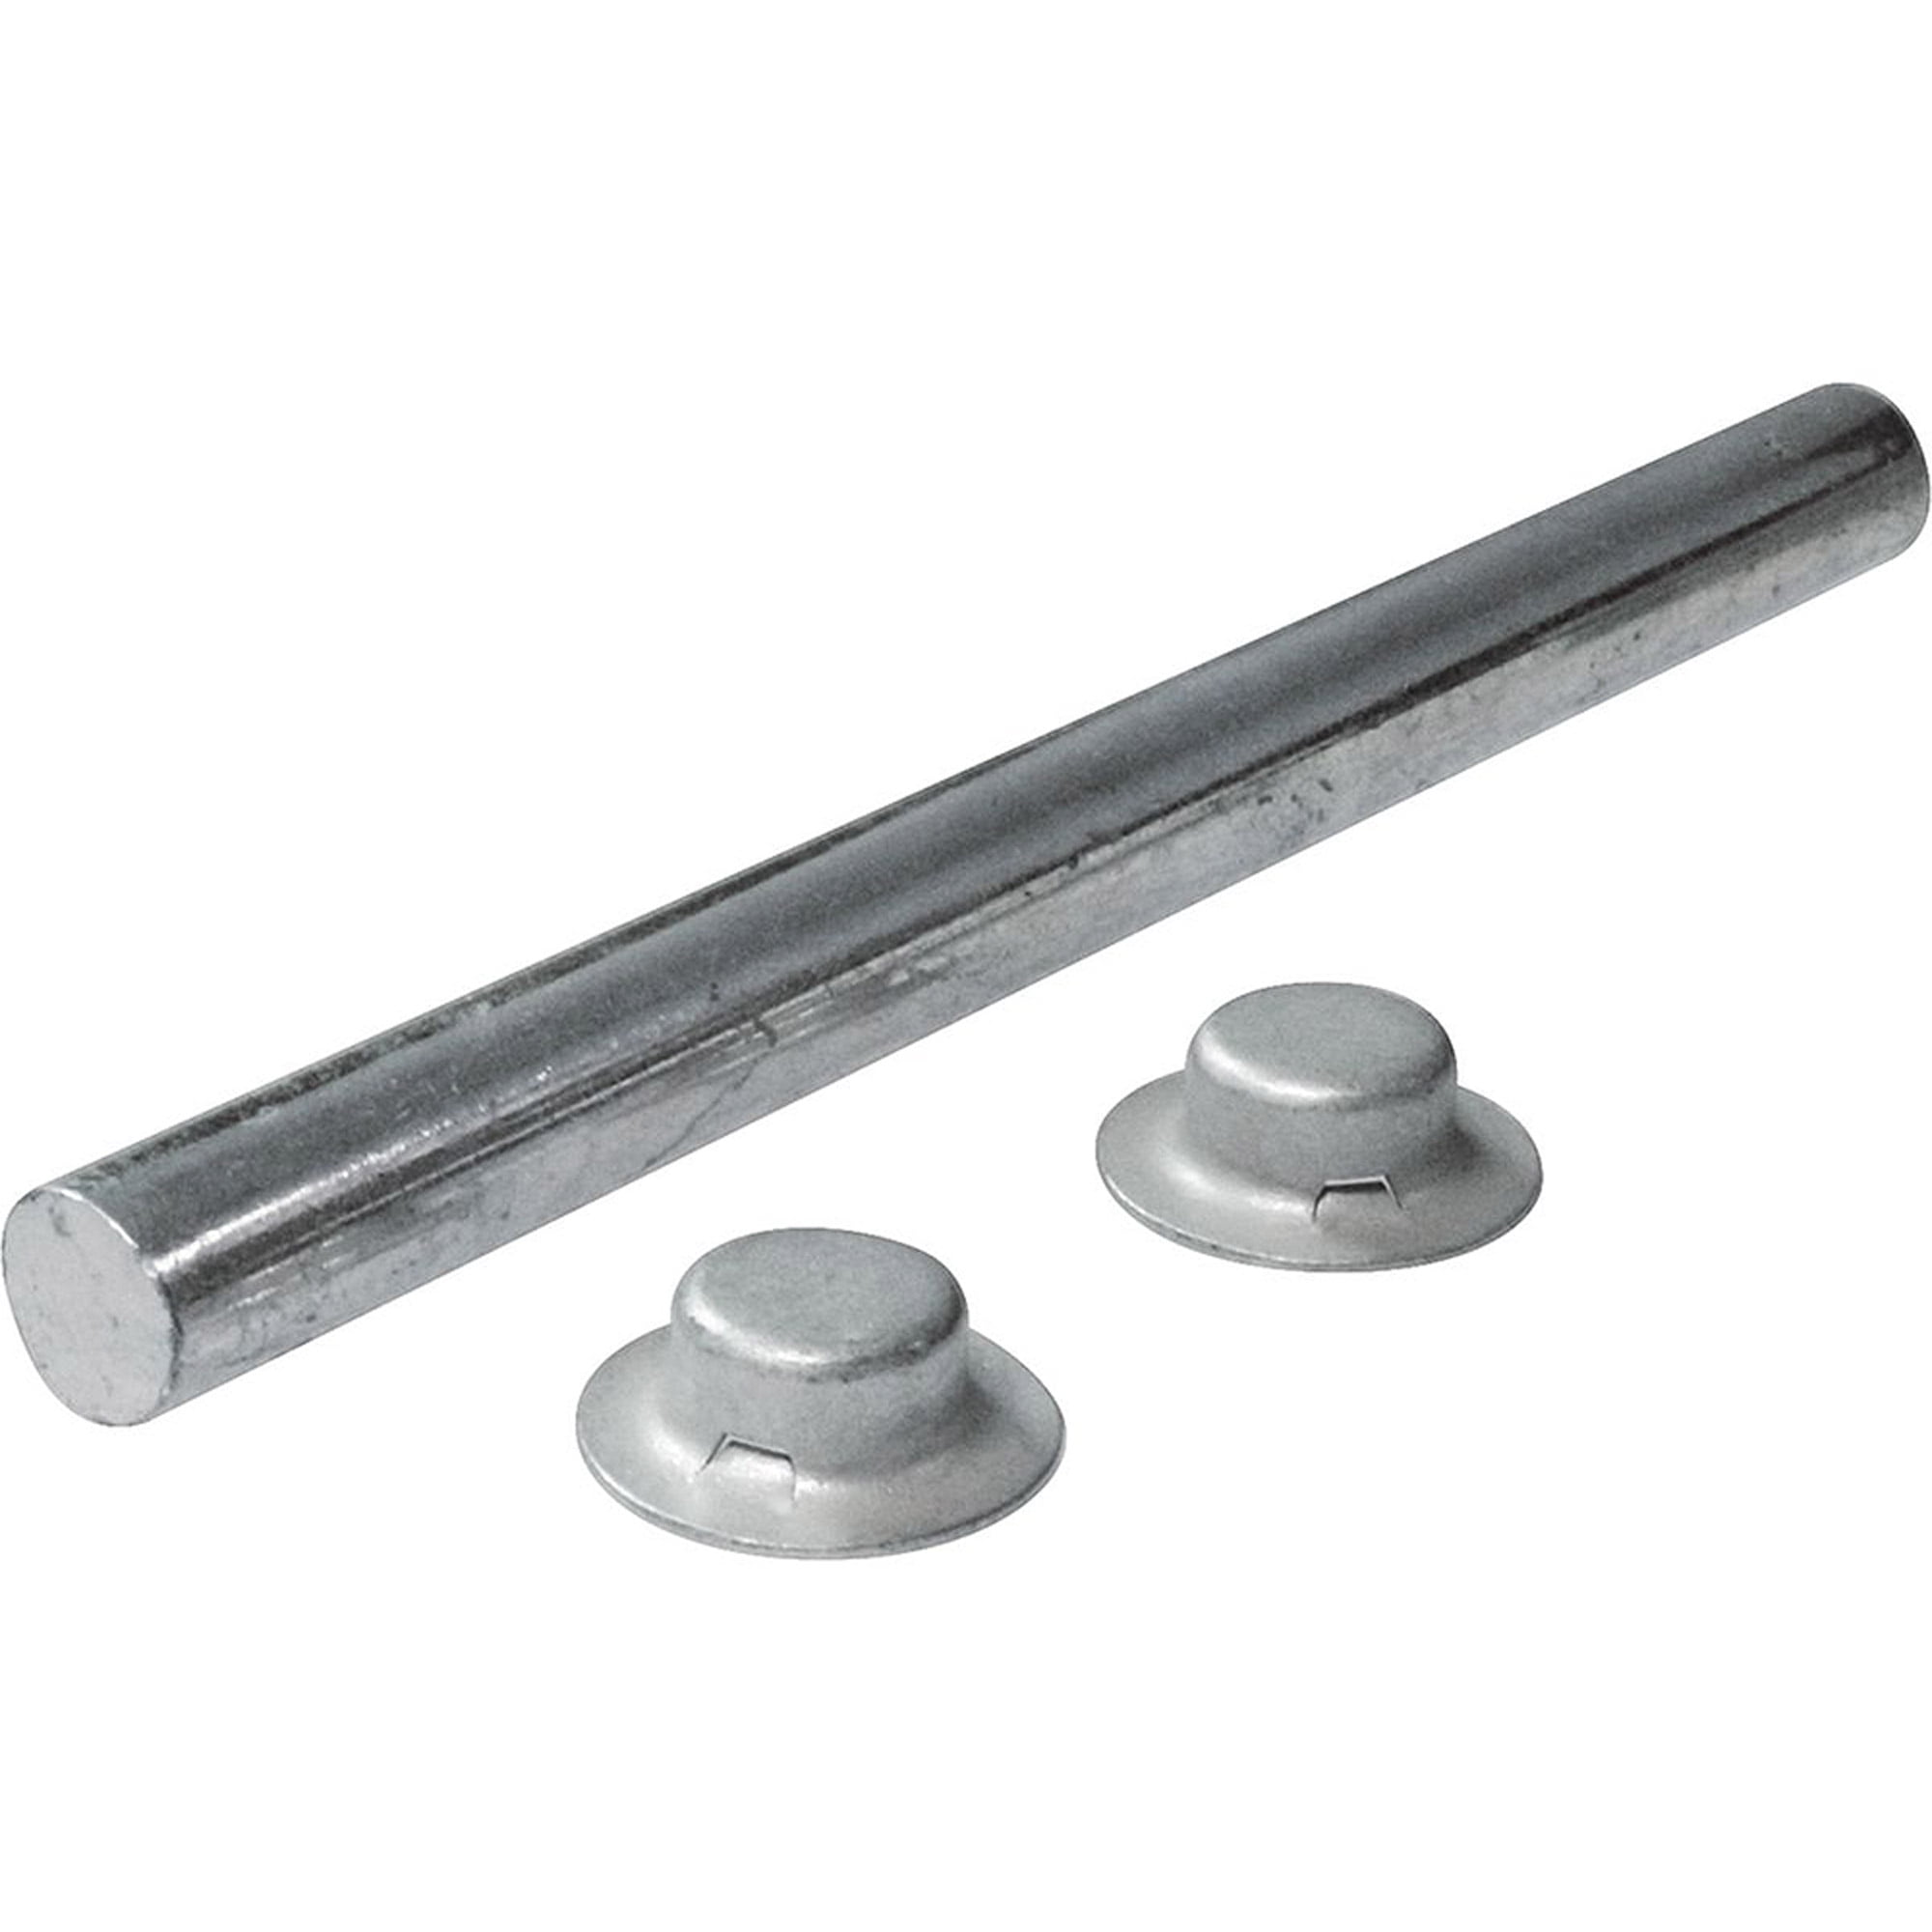 Fits 8 Roller SeaSense Zinc Plated Roller Shafts With Pal Nuts 5/8 x 9 1/4 